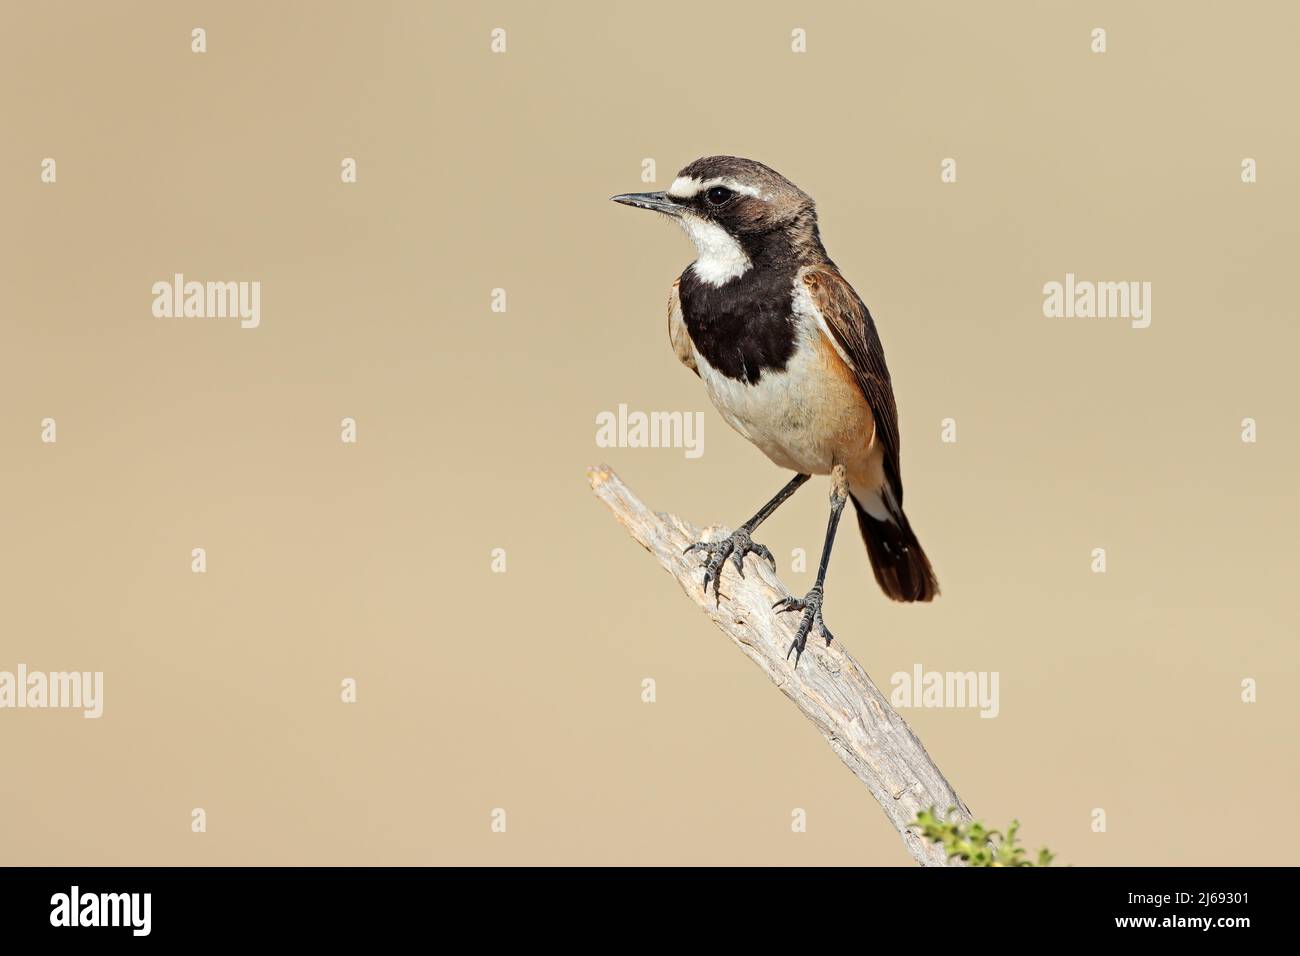 A capped wheatear (Oenanthe pileata) perched on a branch, South Africa Stock Photo